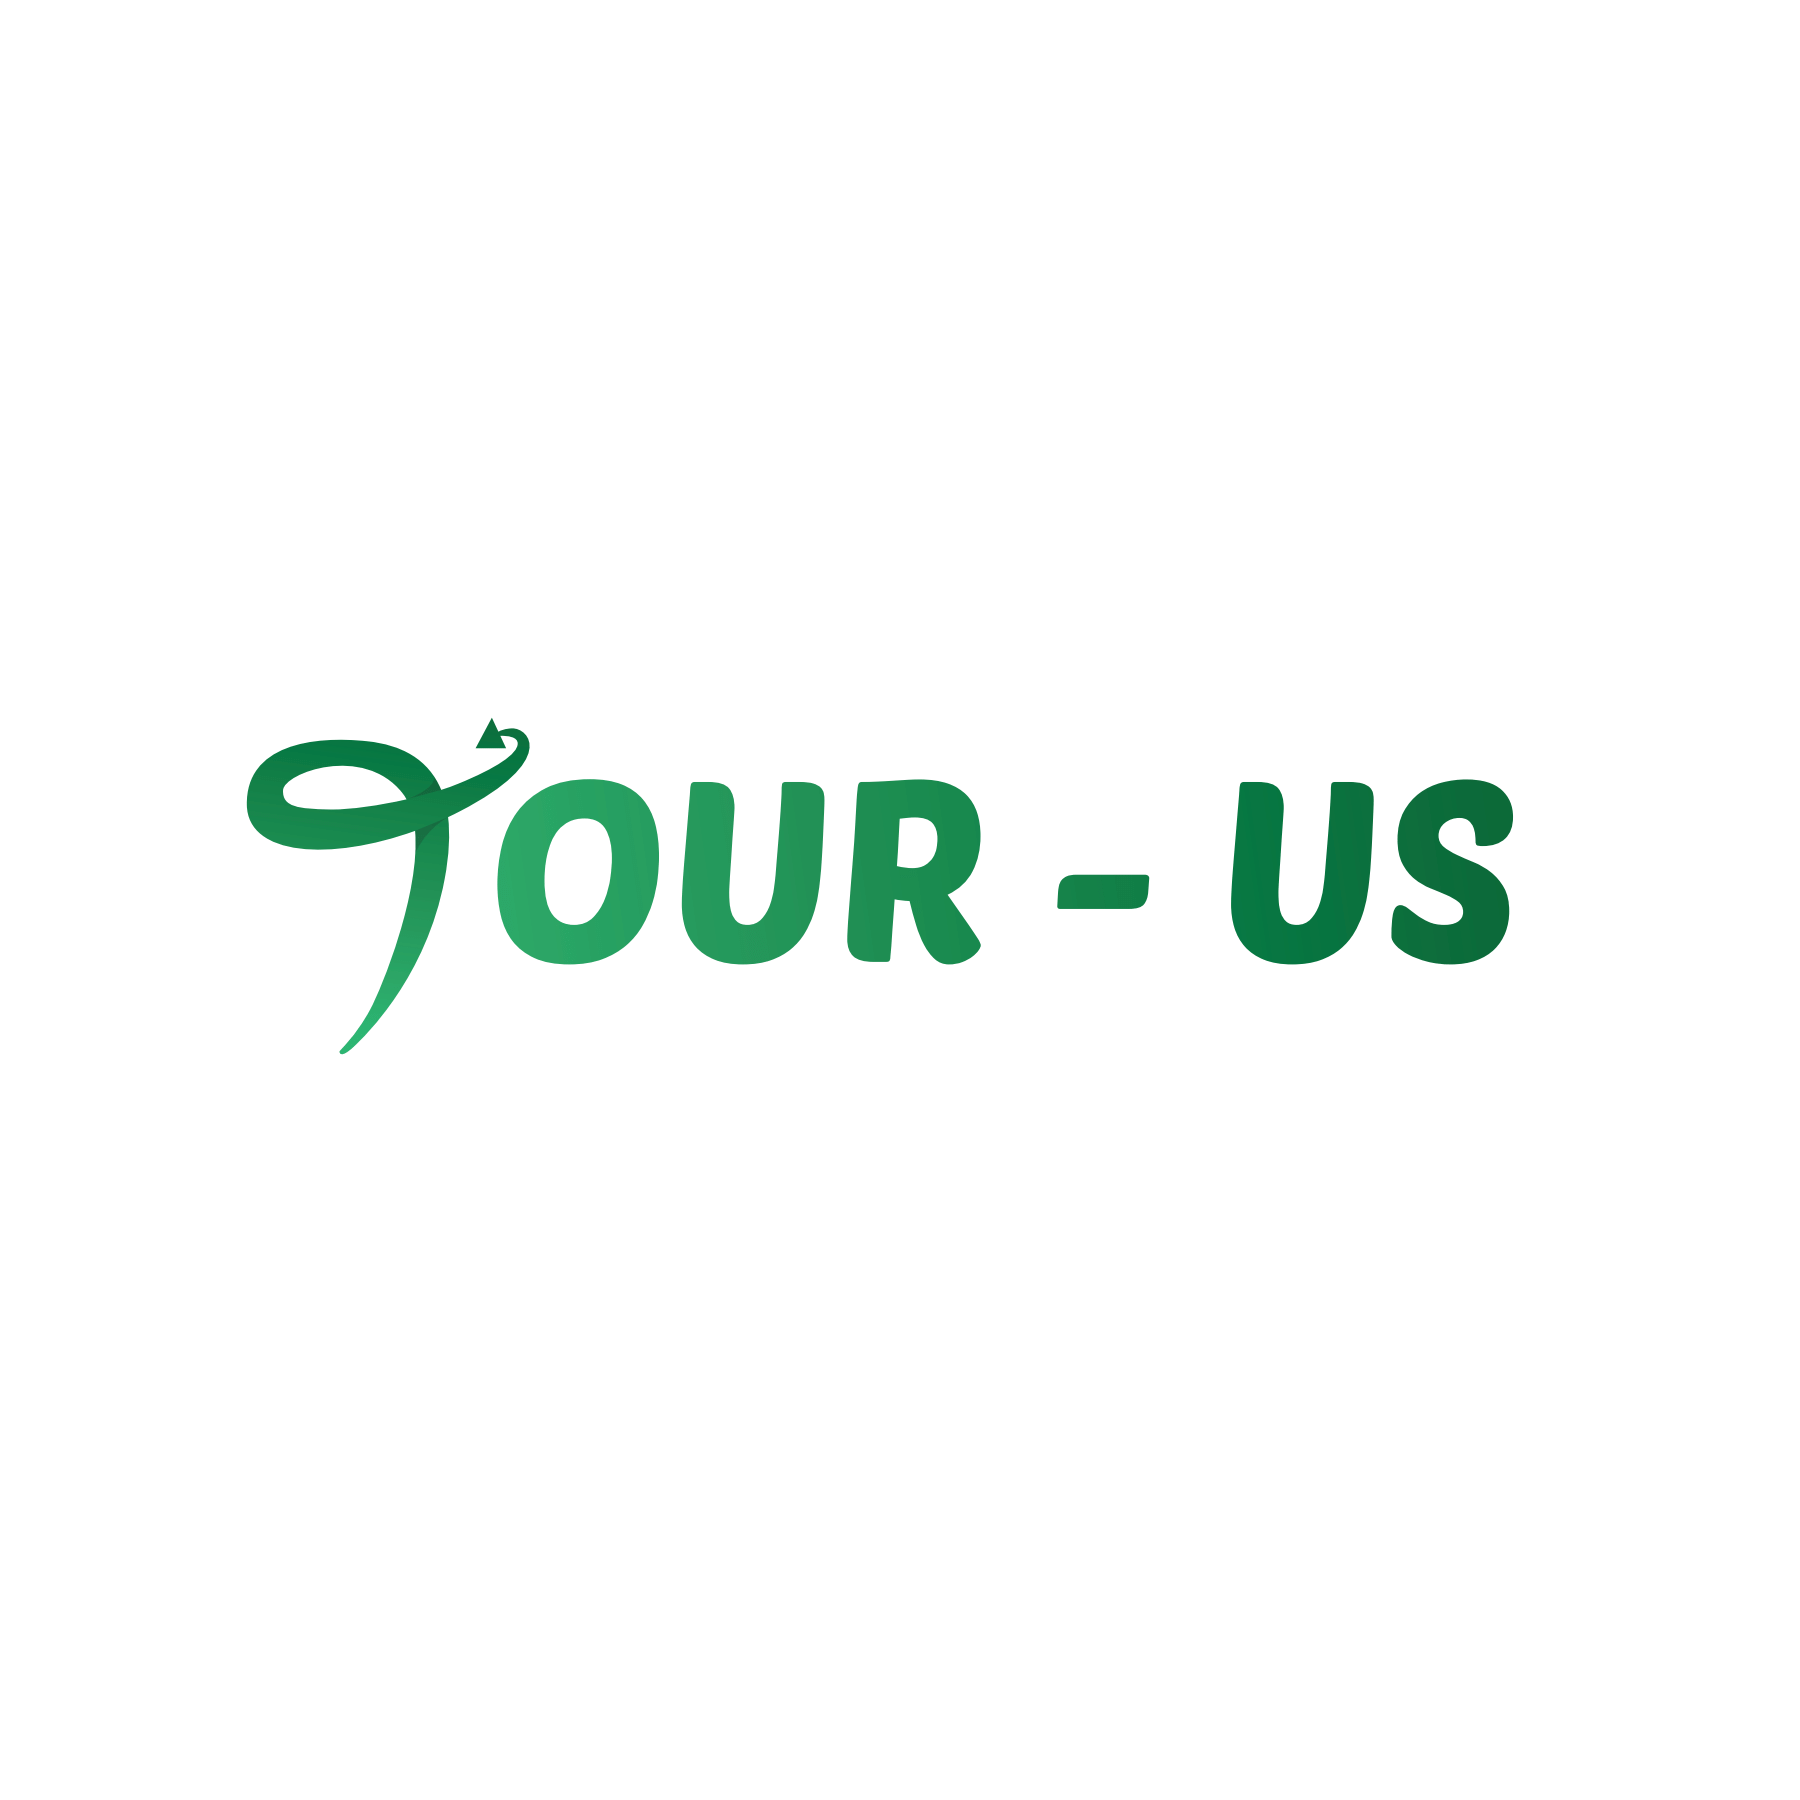 Tour-us (50 to happy) founded by Maya Mahfouz, Yara Mahfouz and Christina Karam. Tour-us’s concept consists of improving the well-being of women aged around 50 and above by organizing touristic field trips in different Lebanese villages and rural areas.